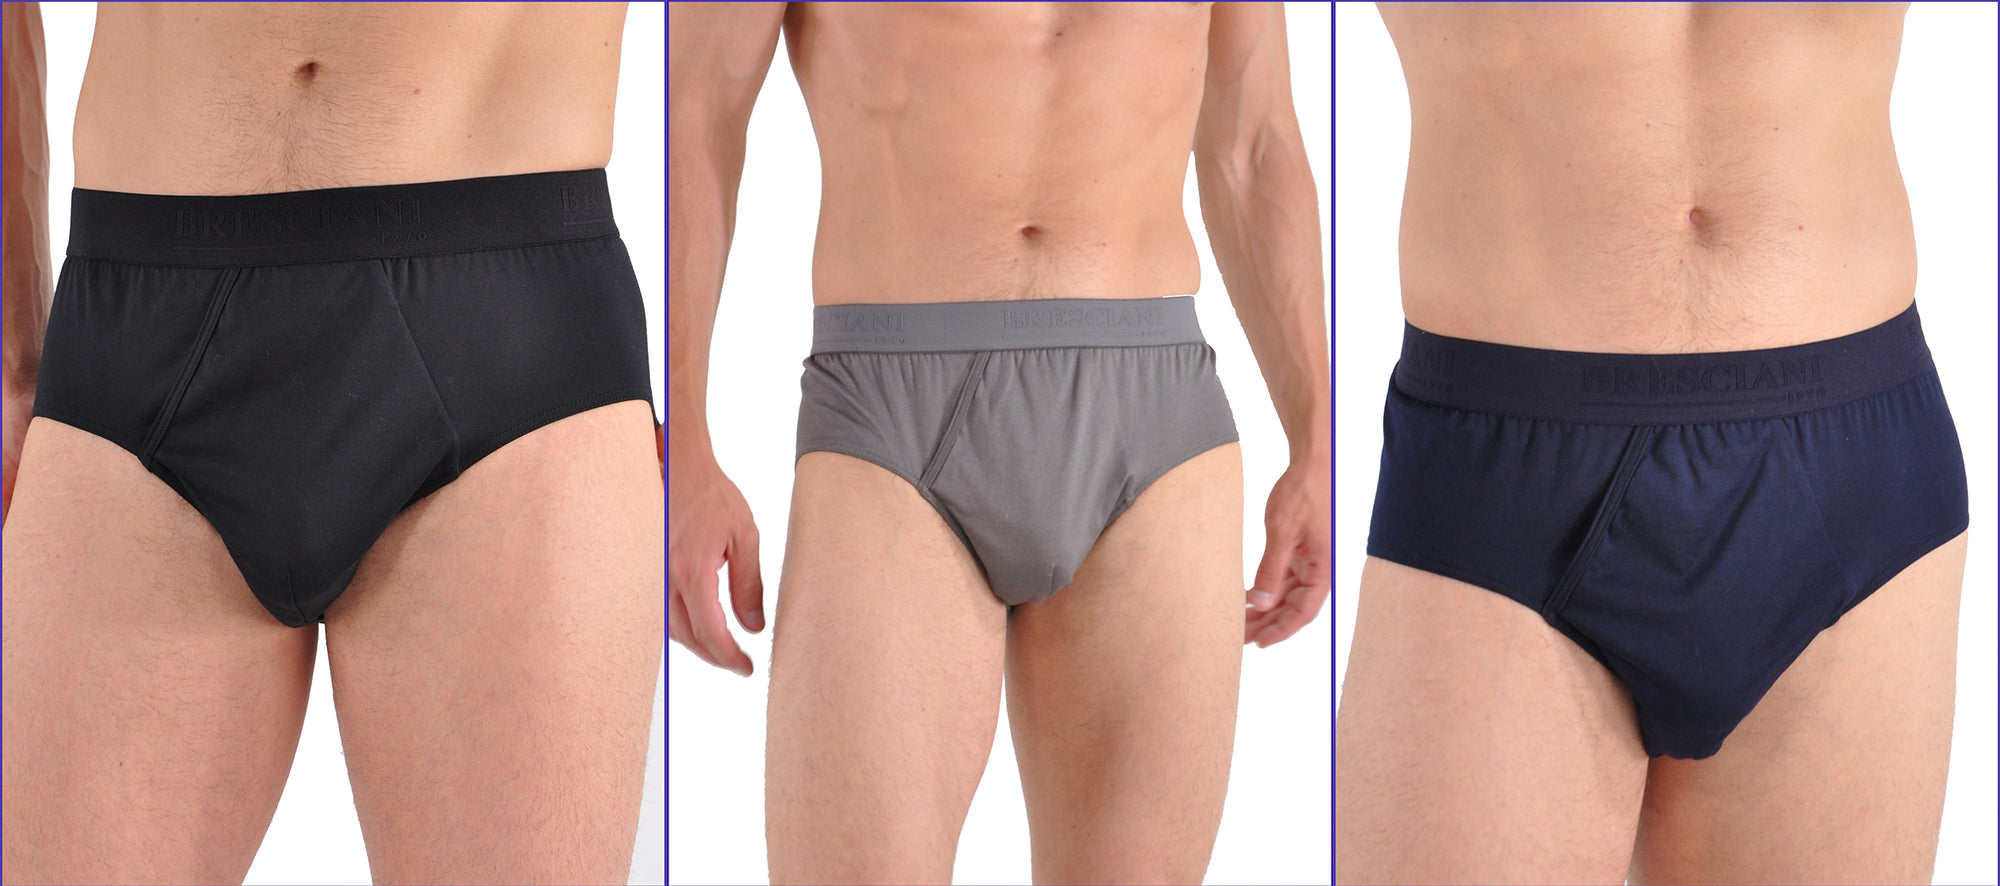 What Color Underwear Should You Wear on New Years? – Underwear